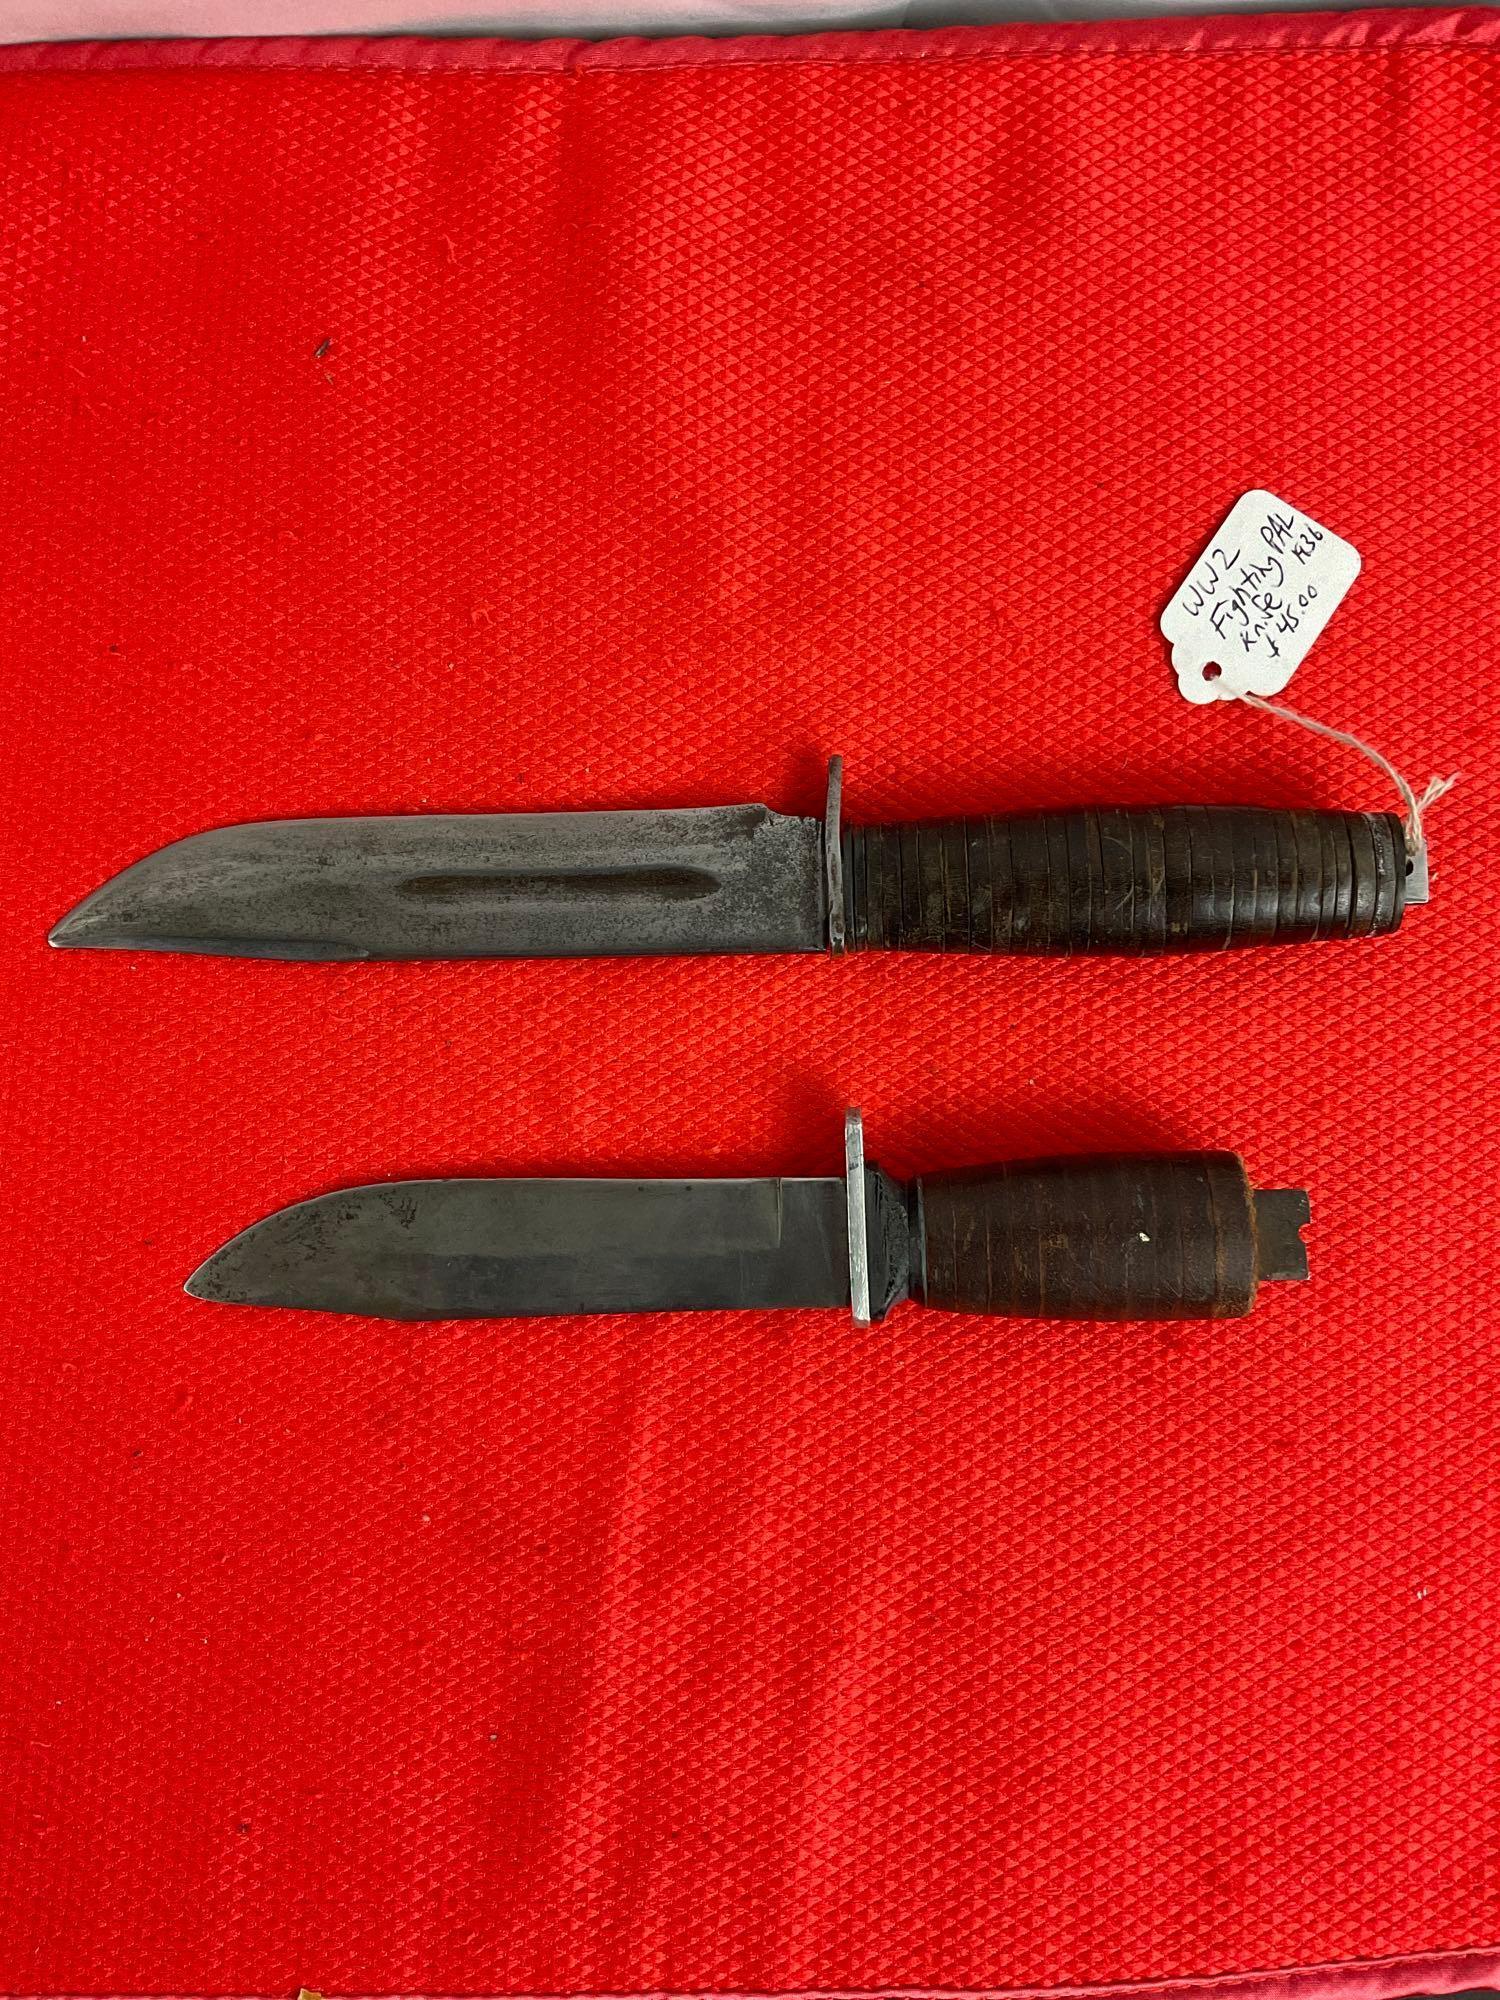 2 pcs Vintage Steel Fixed Blade Hunting Knives. Remington RH-36 & Schrade H-15. As Is. See pics.